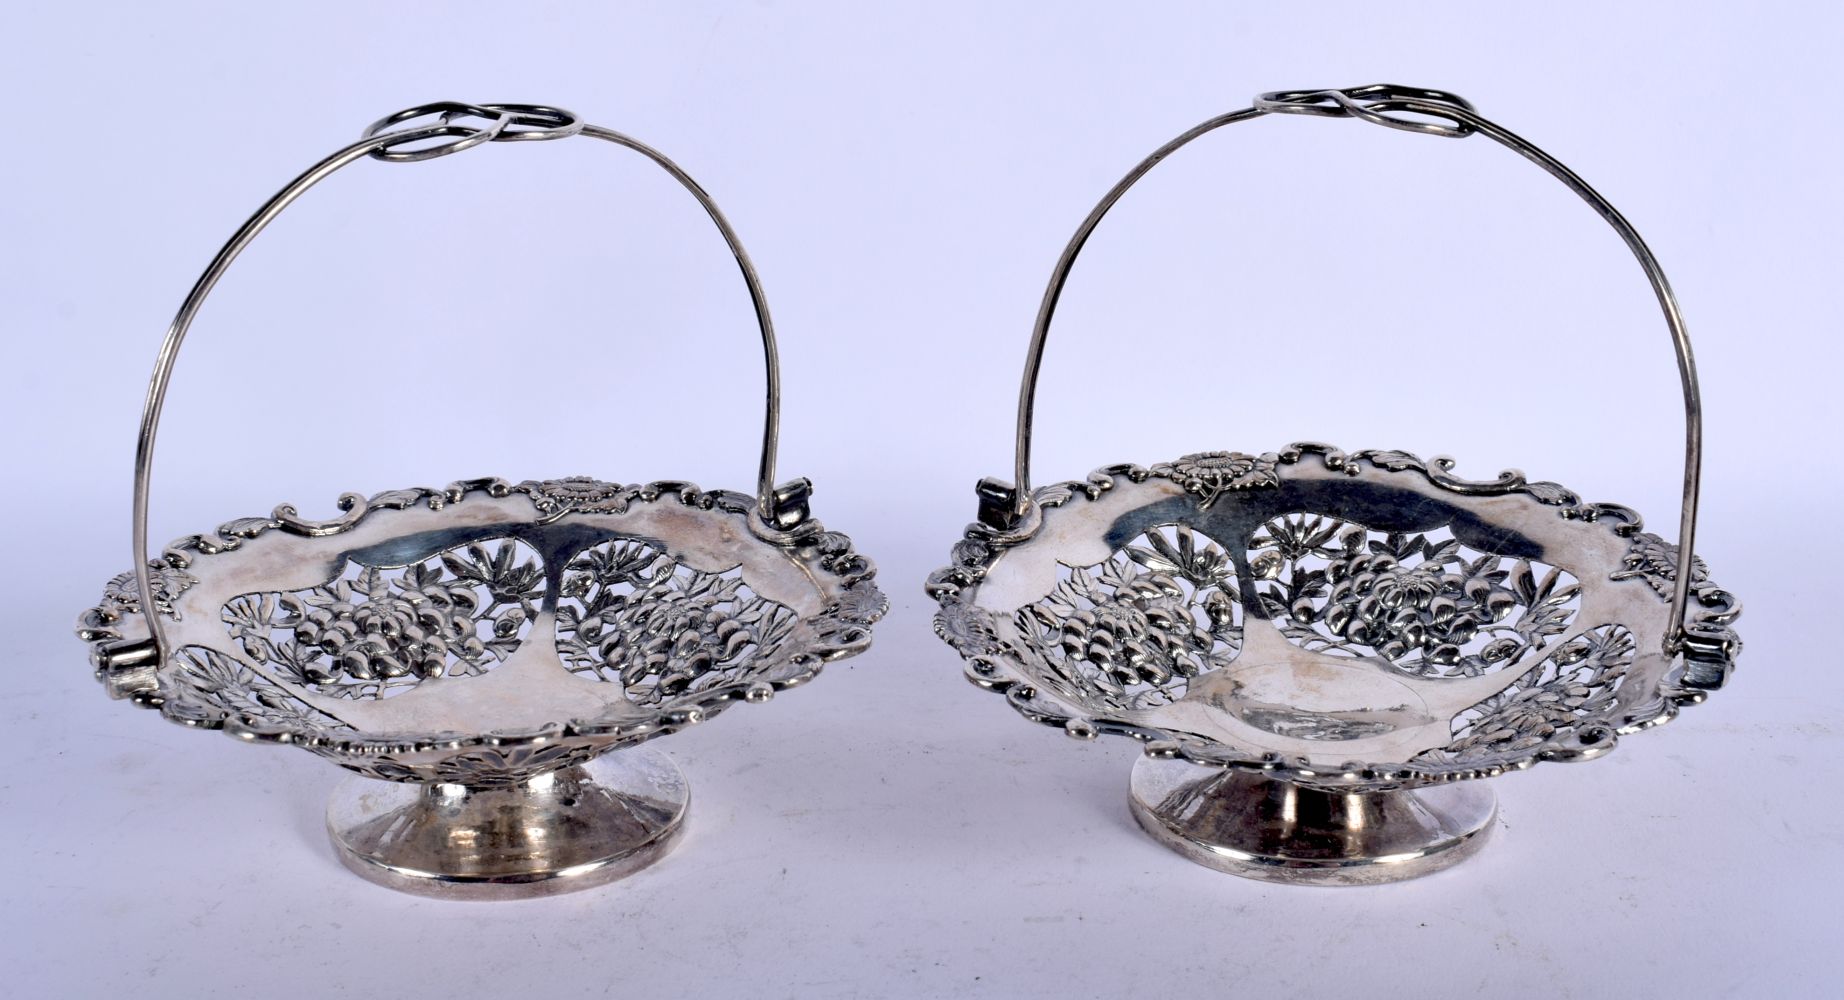 A PAIR OF 19TH CENTURY CHINESE EXPORT ZEEWO SILVER BASKETS. 185 grams. 11 cm x 3.5 cm.